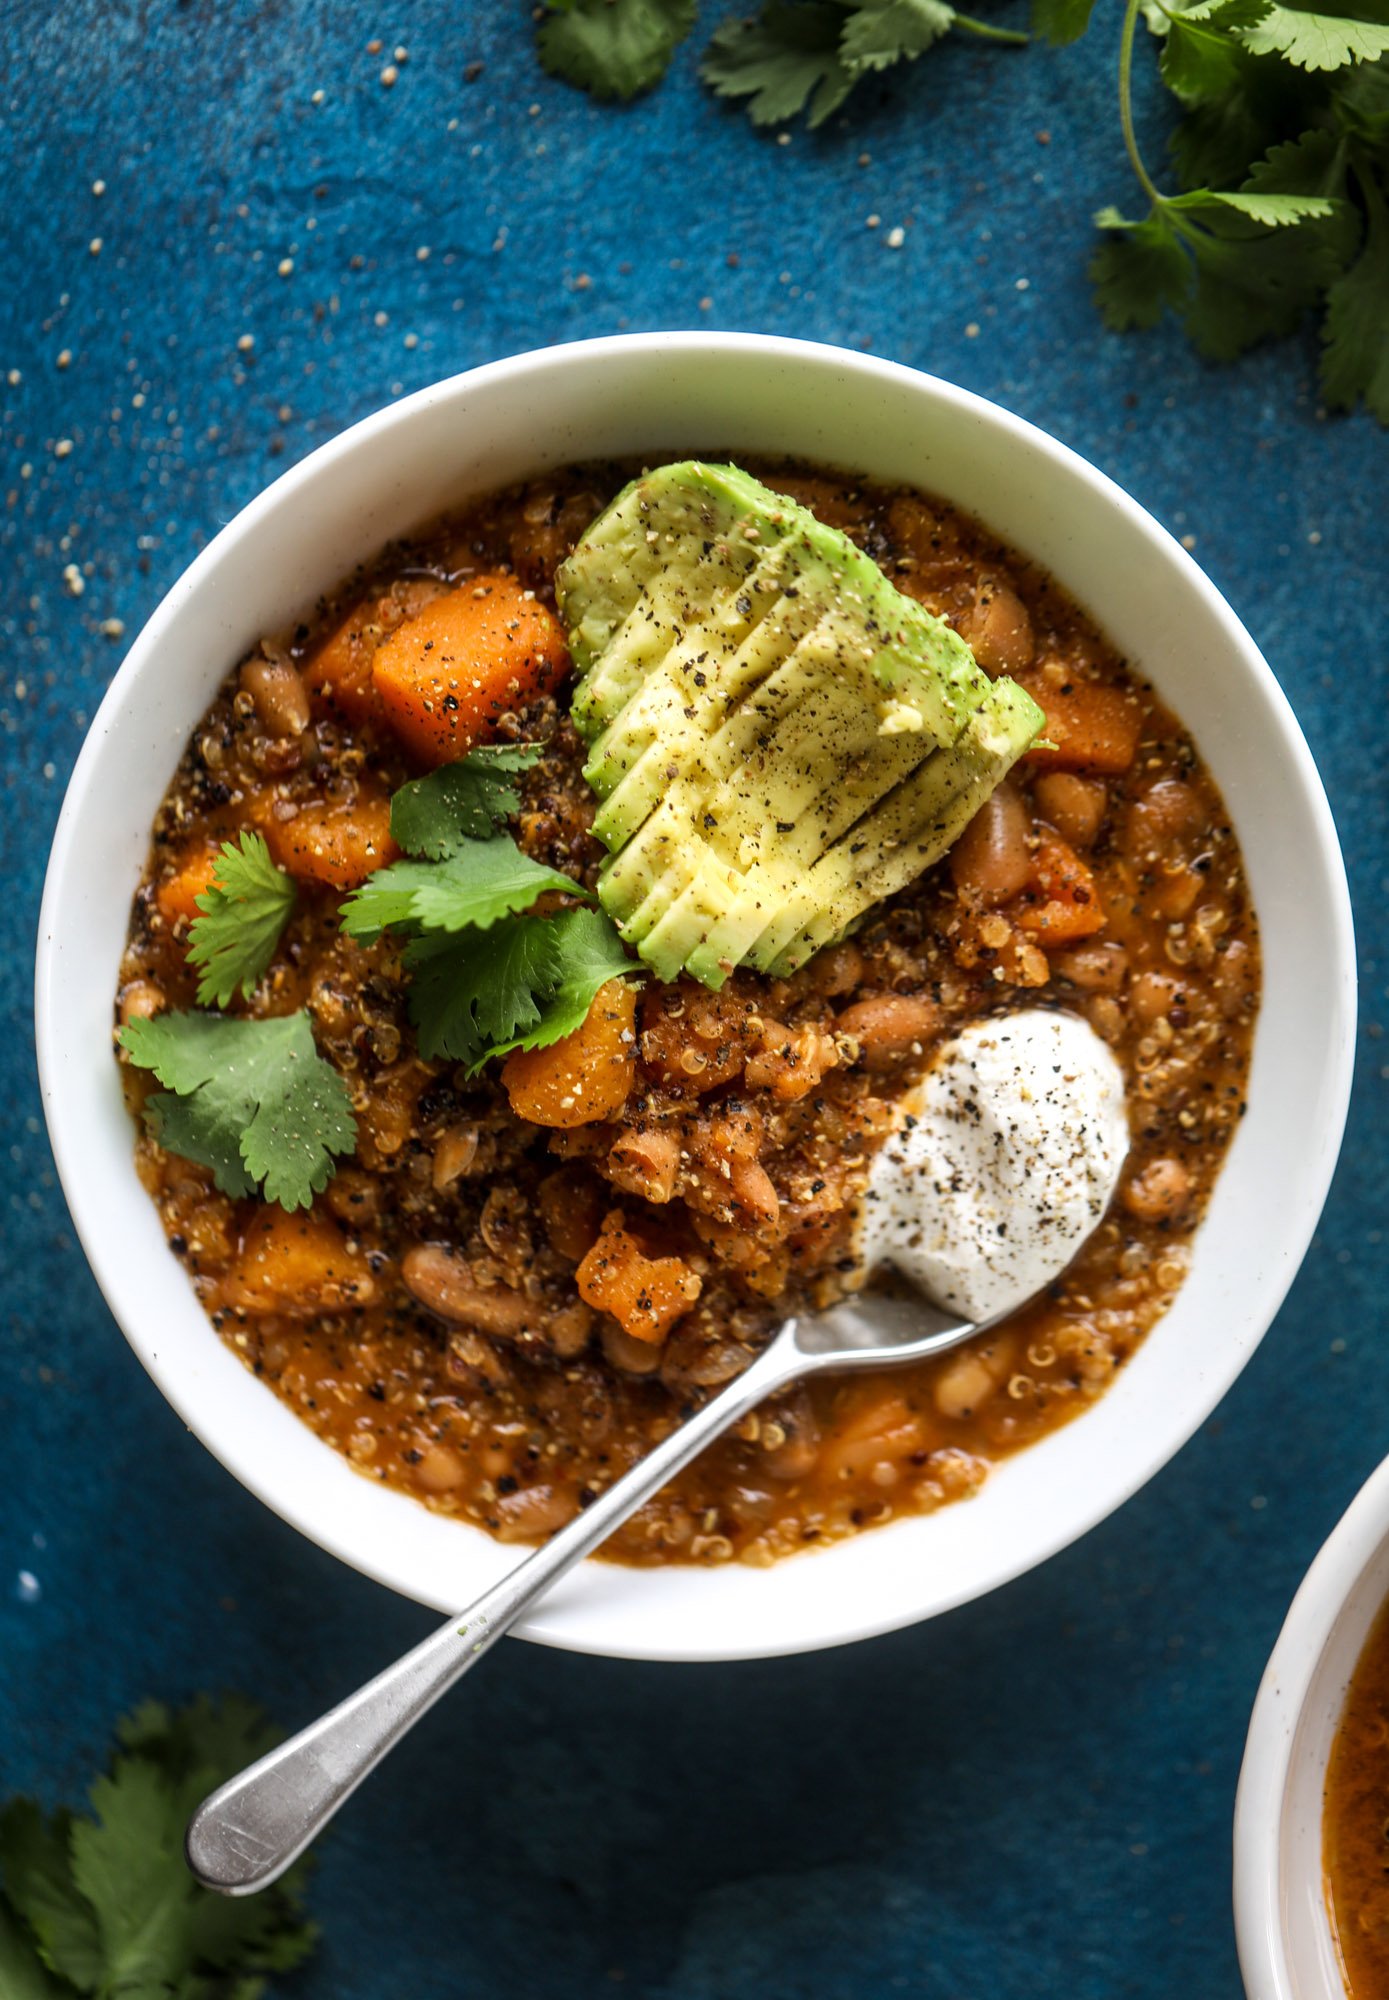 This butternut squash chili is super satisfying and delicious! It's made with pinto beans and quinoa, comes together quickly and is filling and perfect to reheat for lunches. Everything you want in a vegetarian chili! I howsweeteats.com #butternutsquash #chili